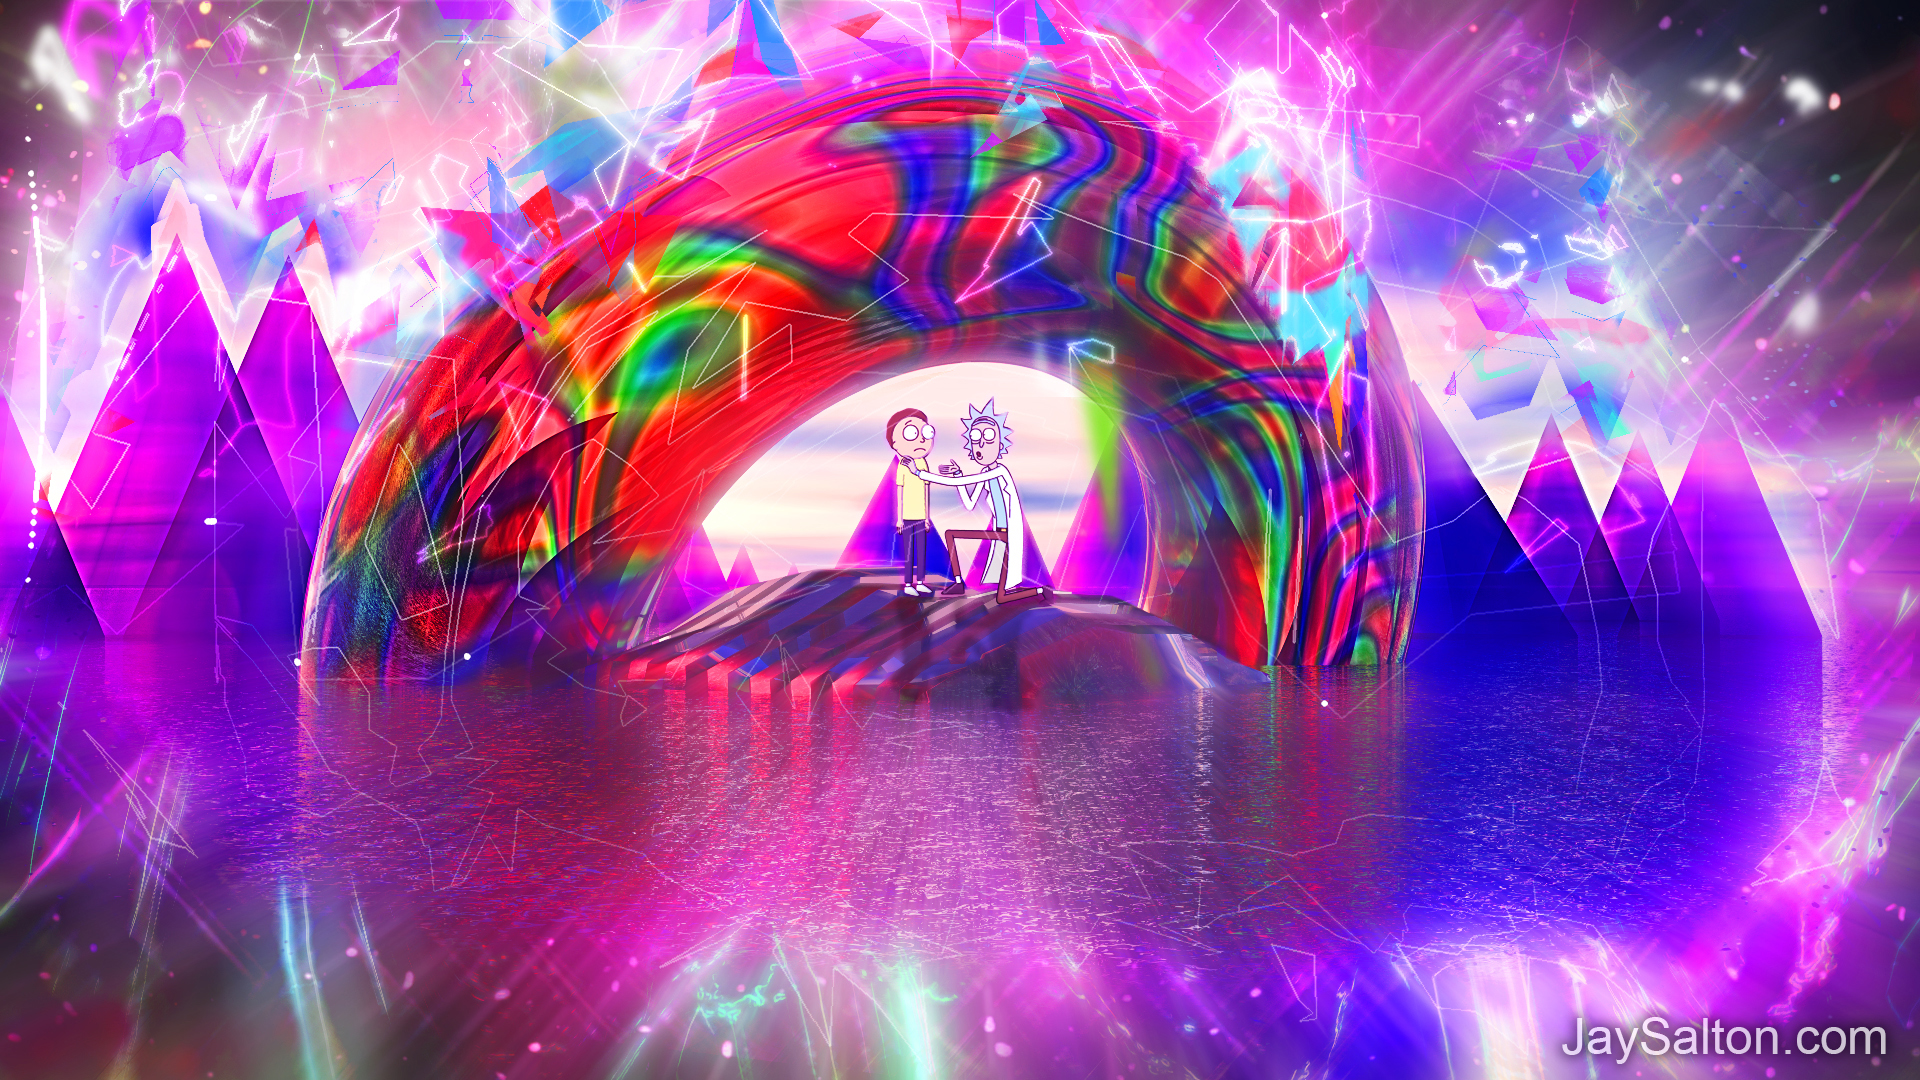 200 or more Rick And Morty Trippy Wallpaper ~ Ameliakirk